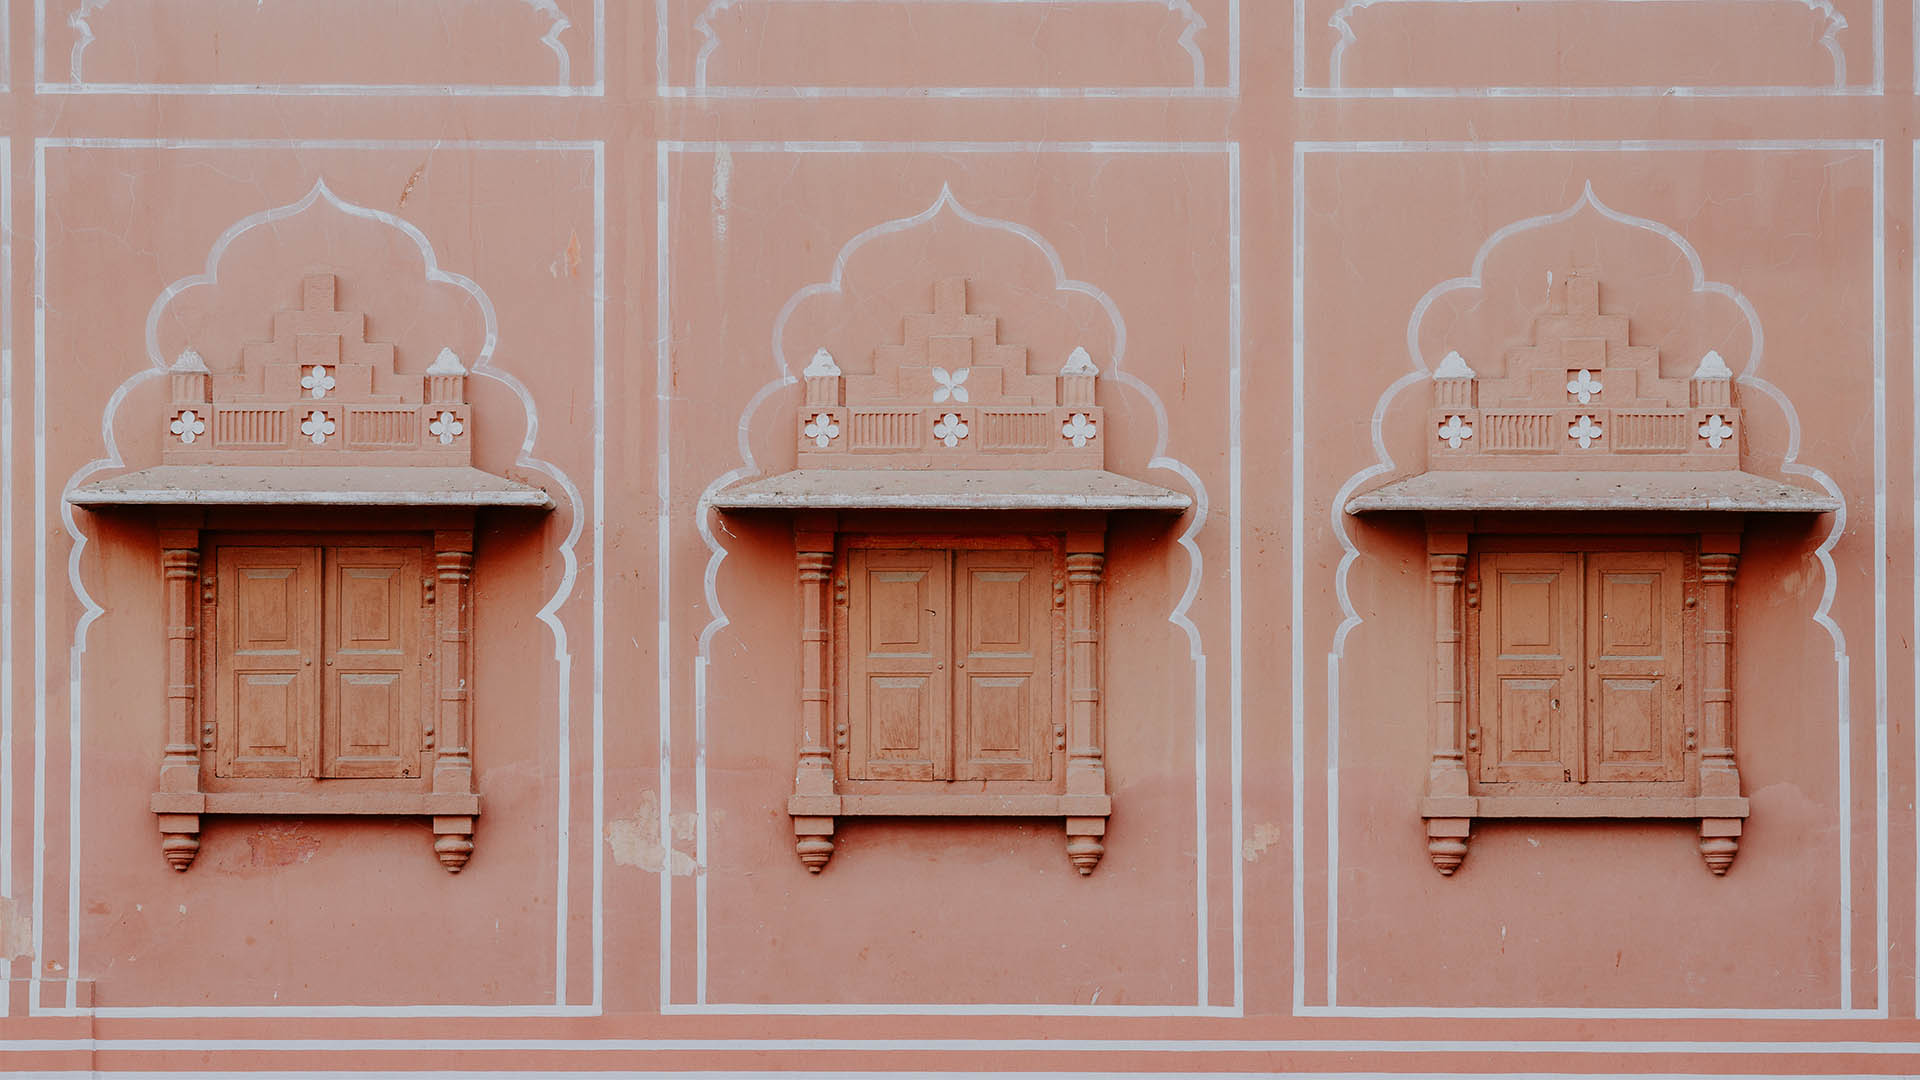 The ultimate Jaipur city guide - Small Luxury Hotels of the World Journal